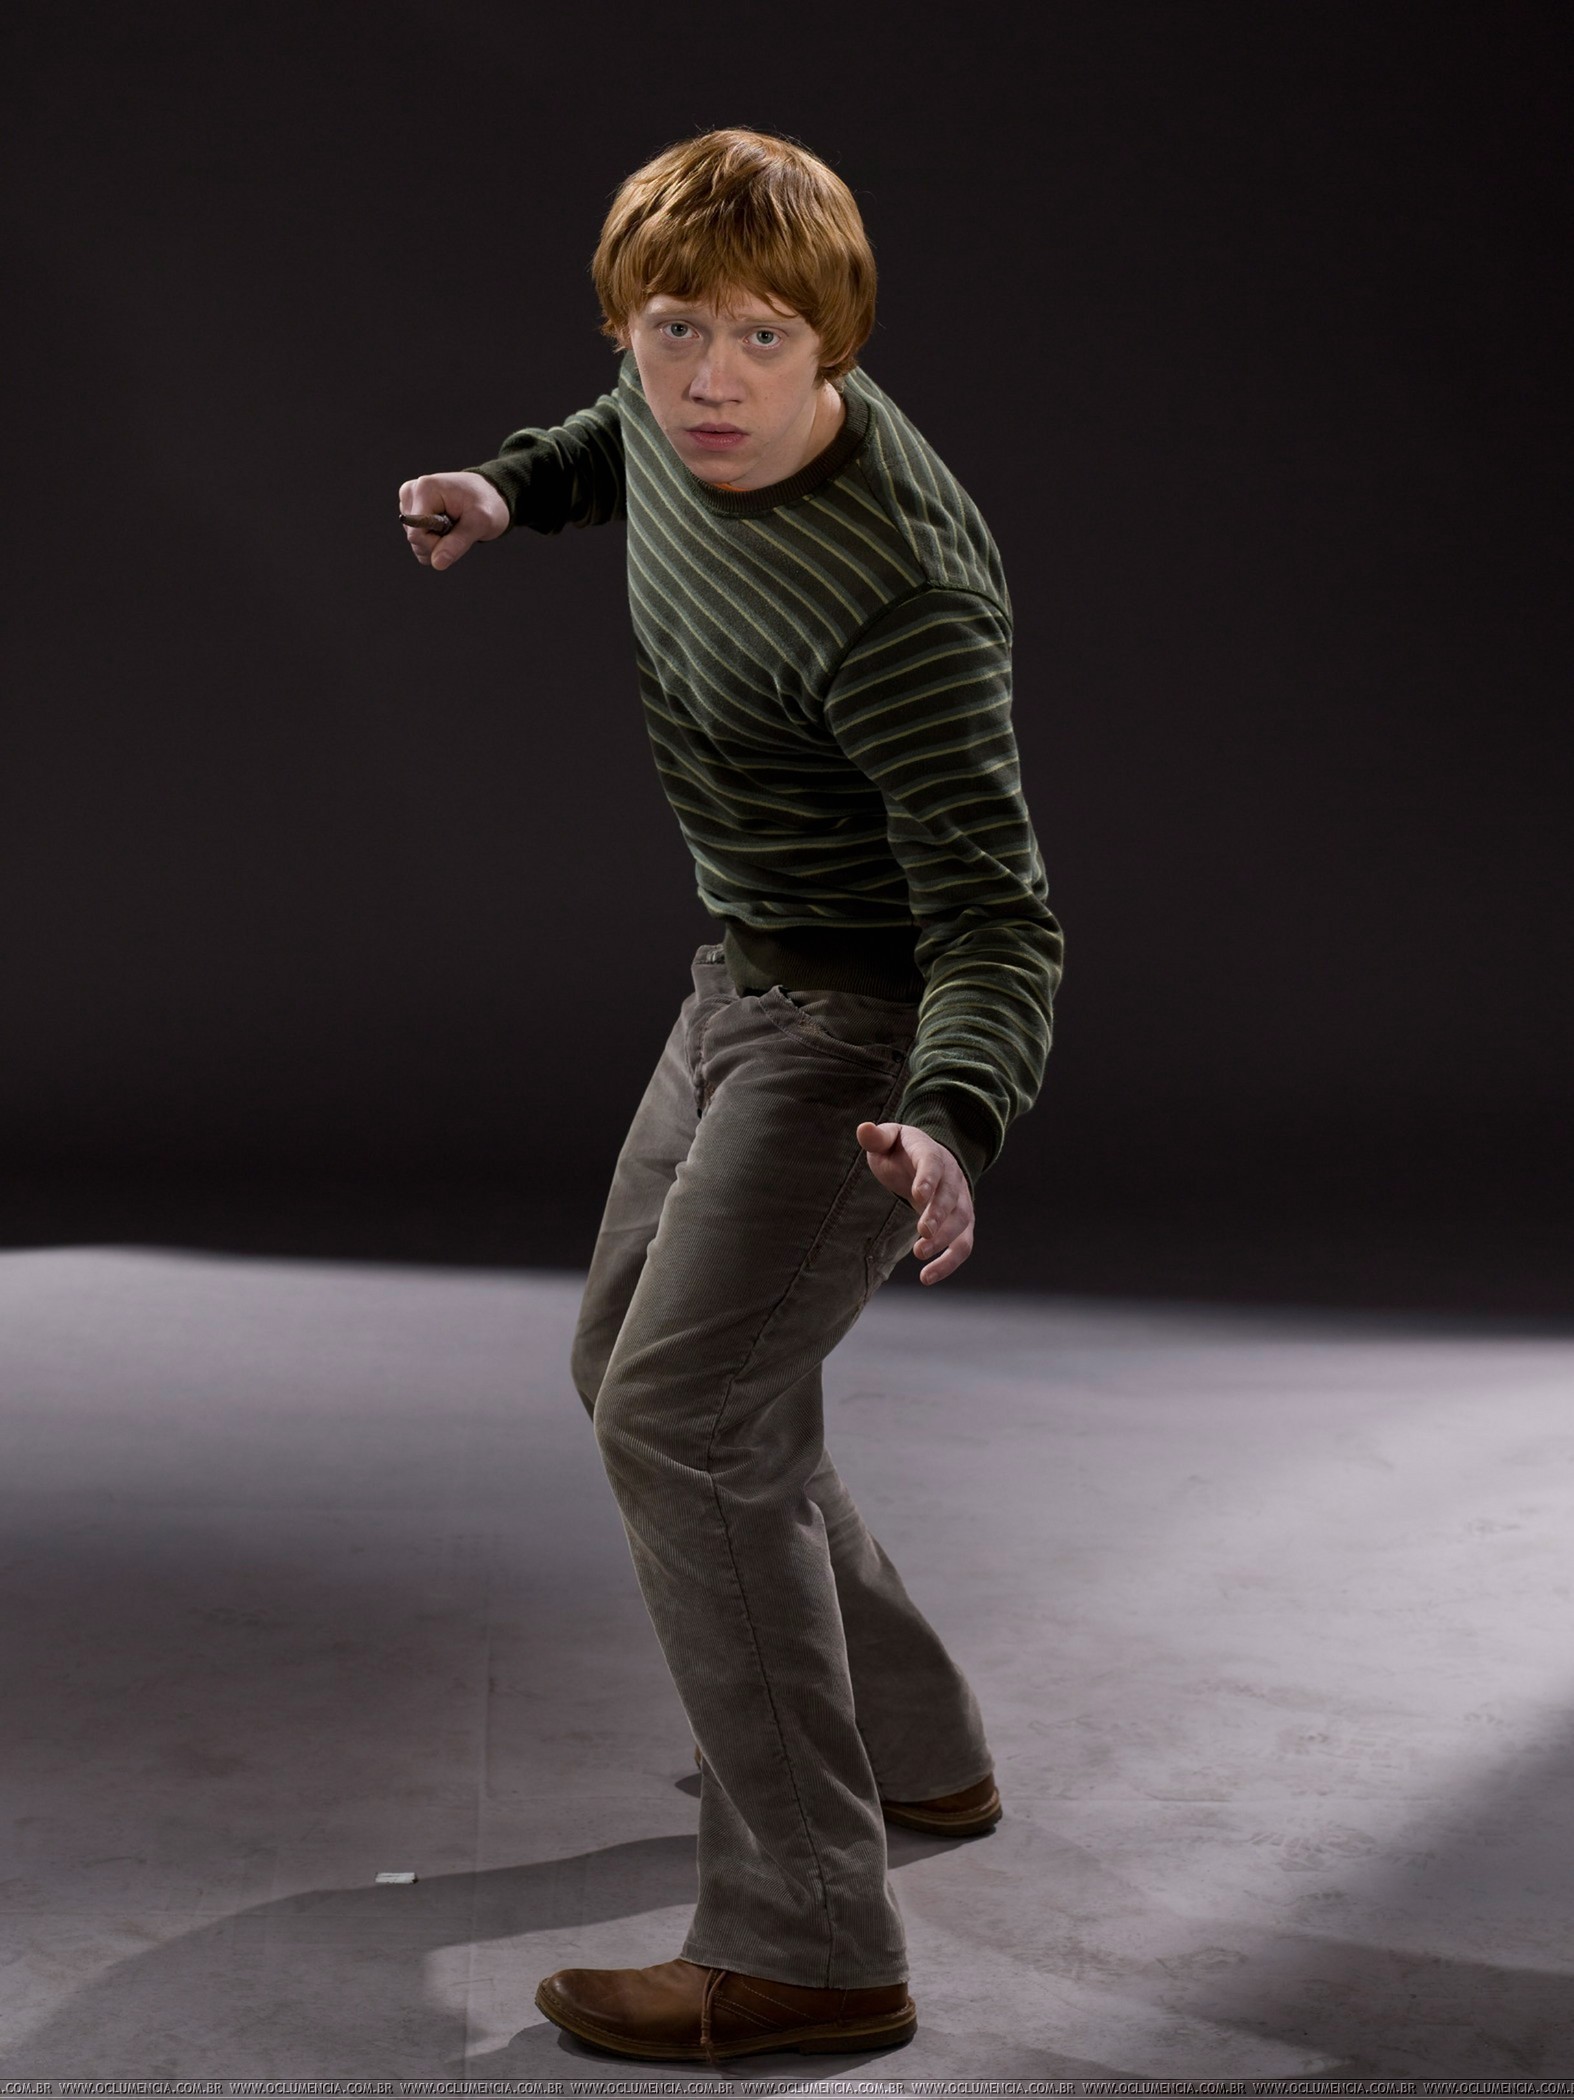 Ron in HP6 harry potter 18205748 1574 2100